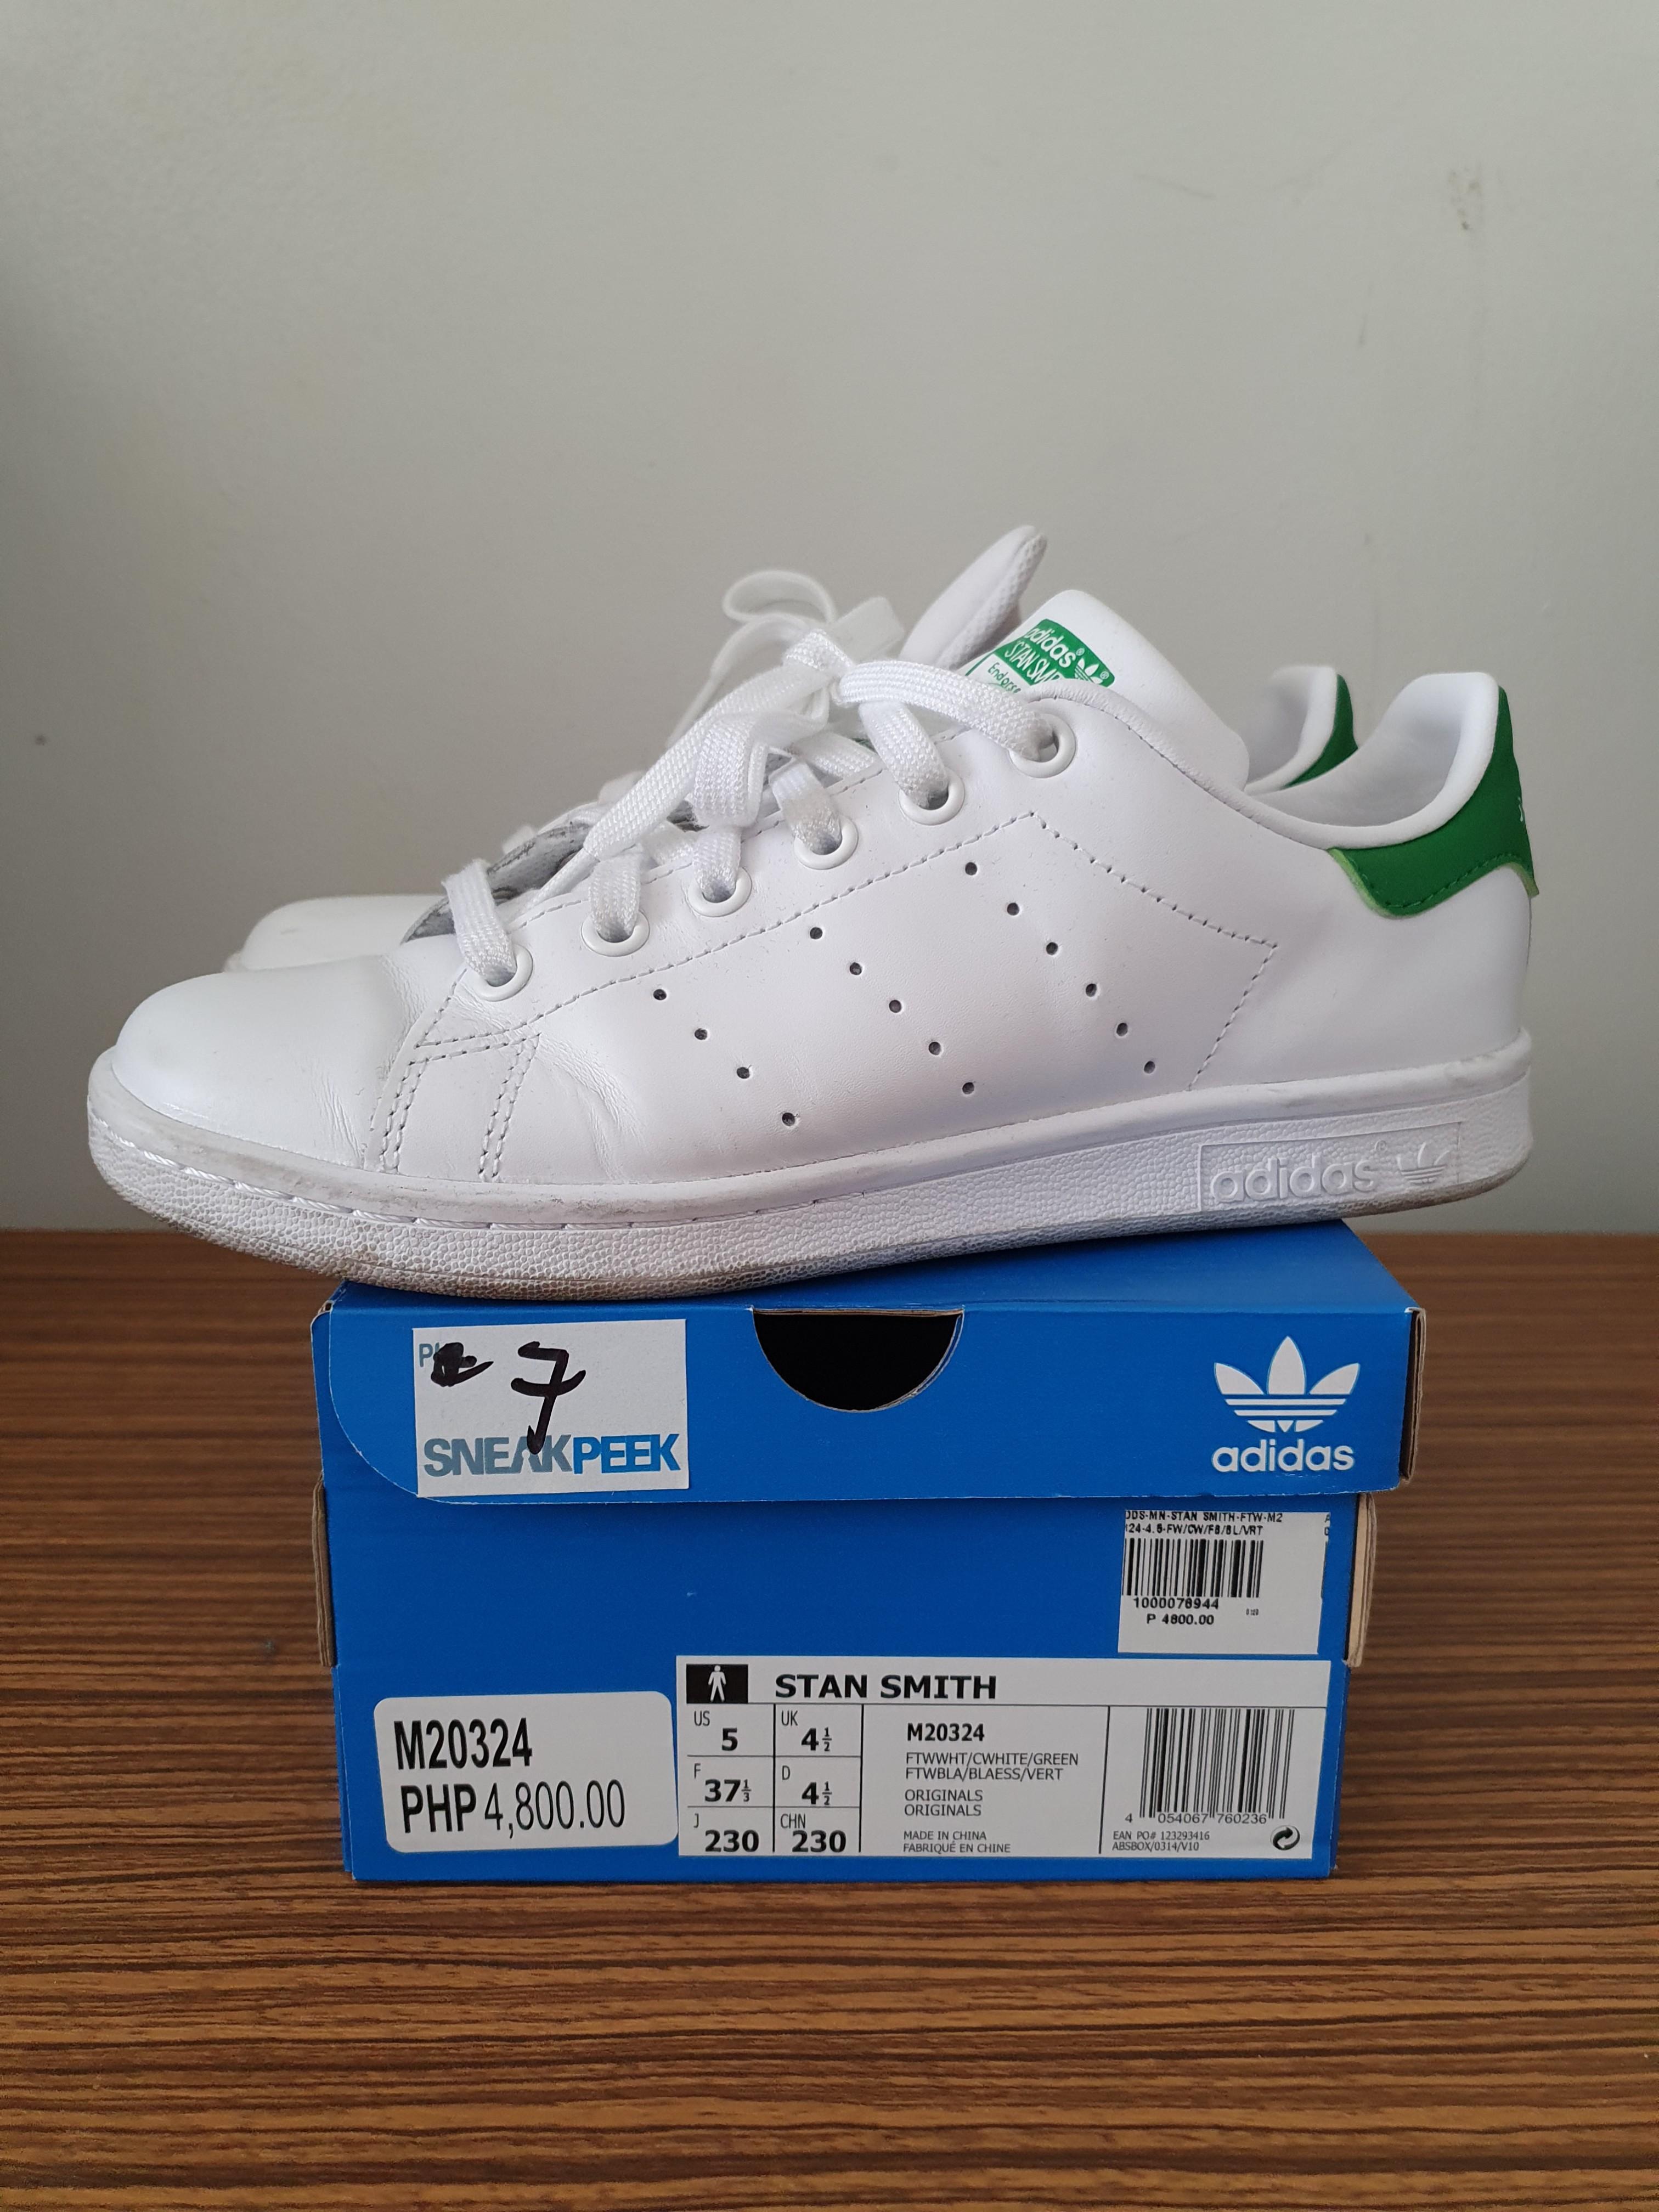 stan smith shoes size 6